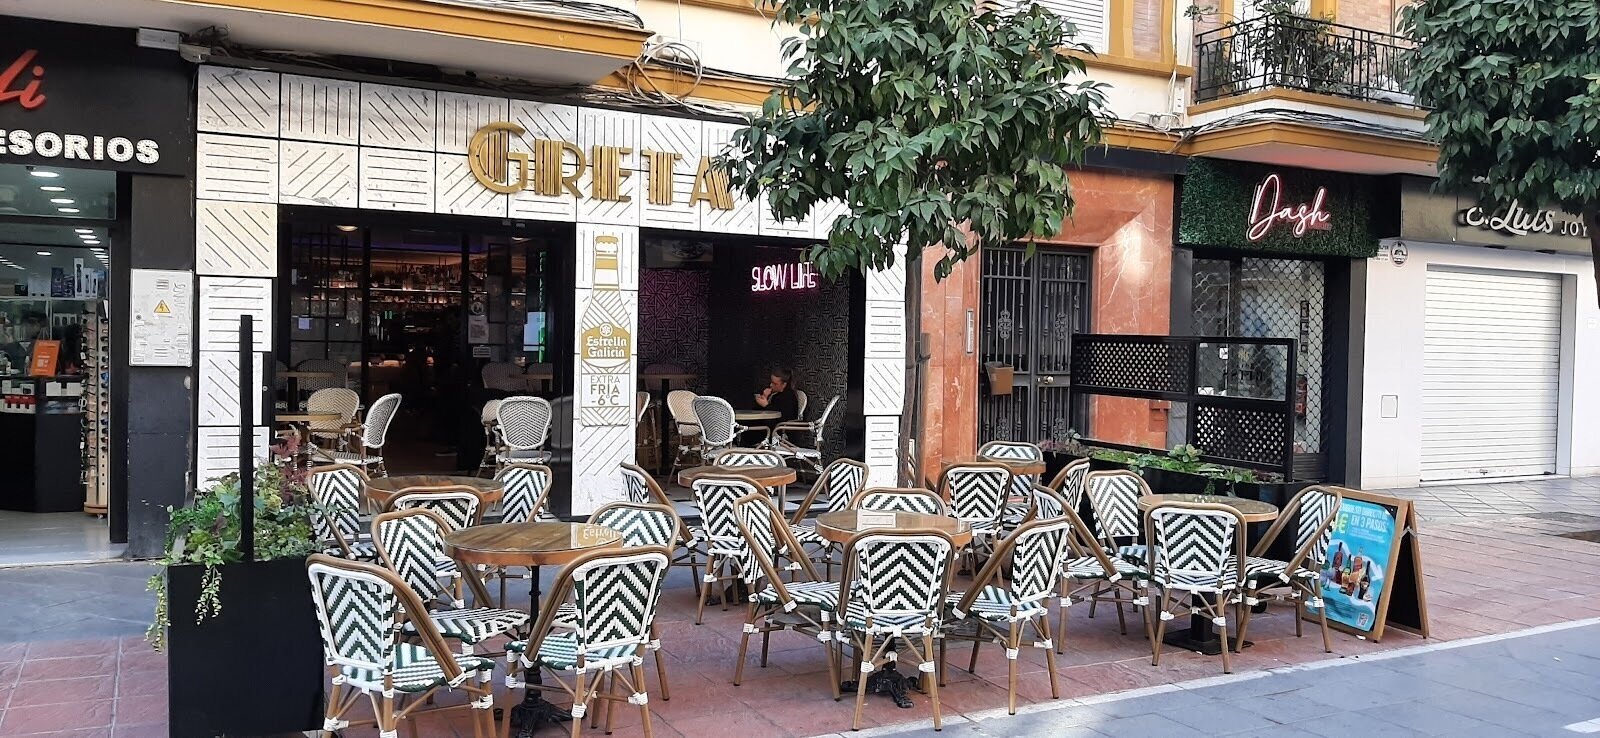 <span class="translation_missing" title="translation missing: en.meta.location_title, location_name: Greta Sevilla, city: Seville">Location Title</span>